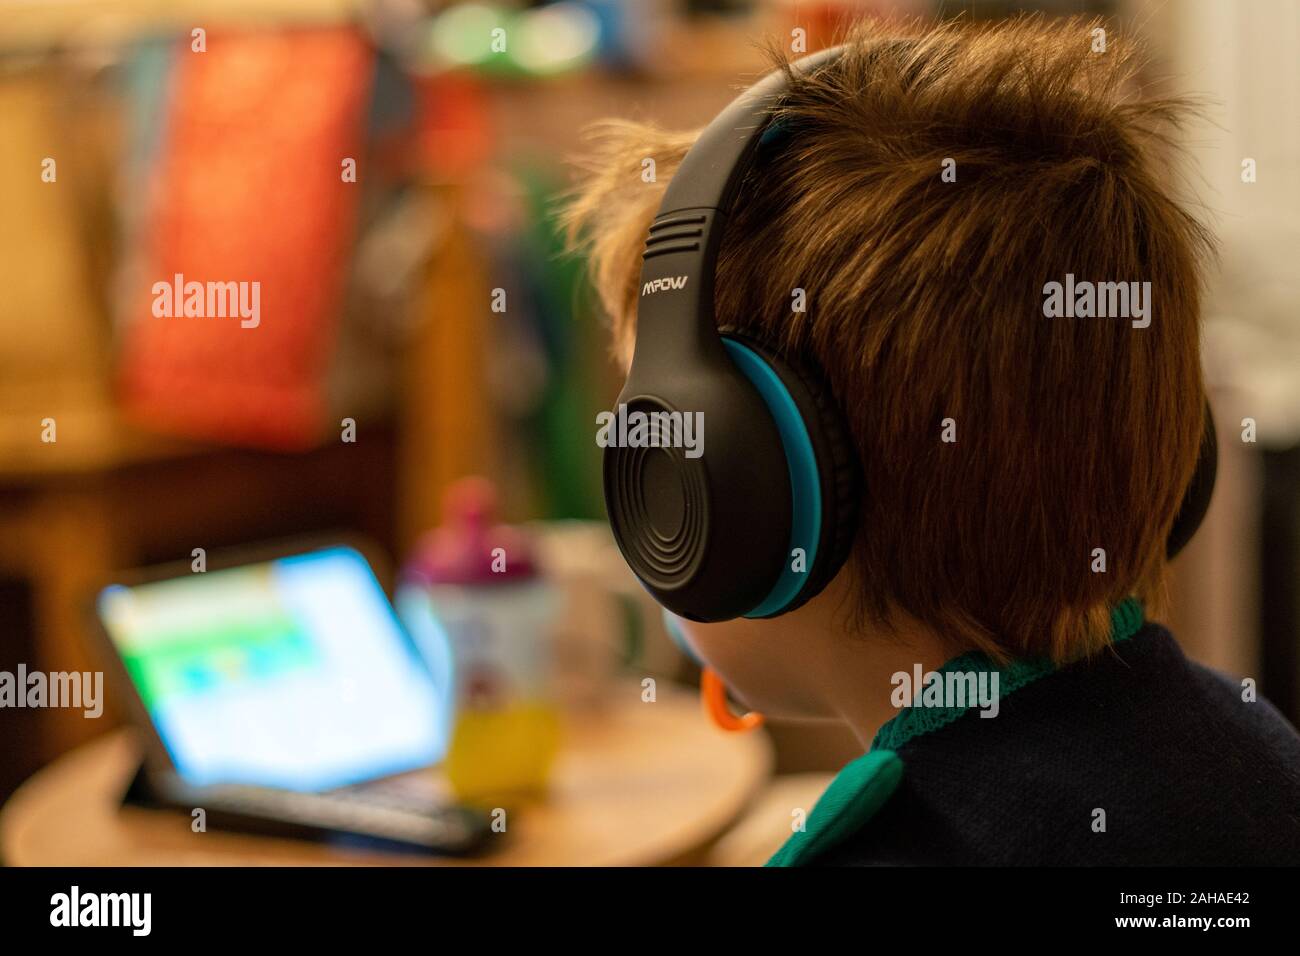 A three year old child watching a tablet or mobile device wearing headphones Stock Photo